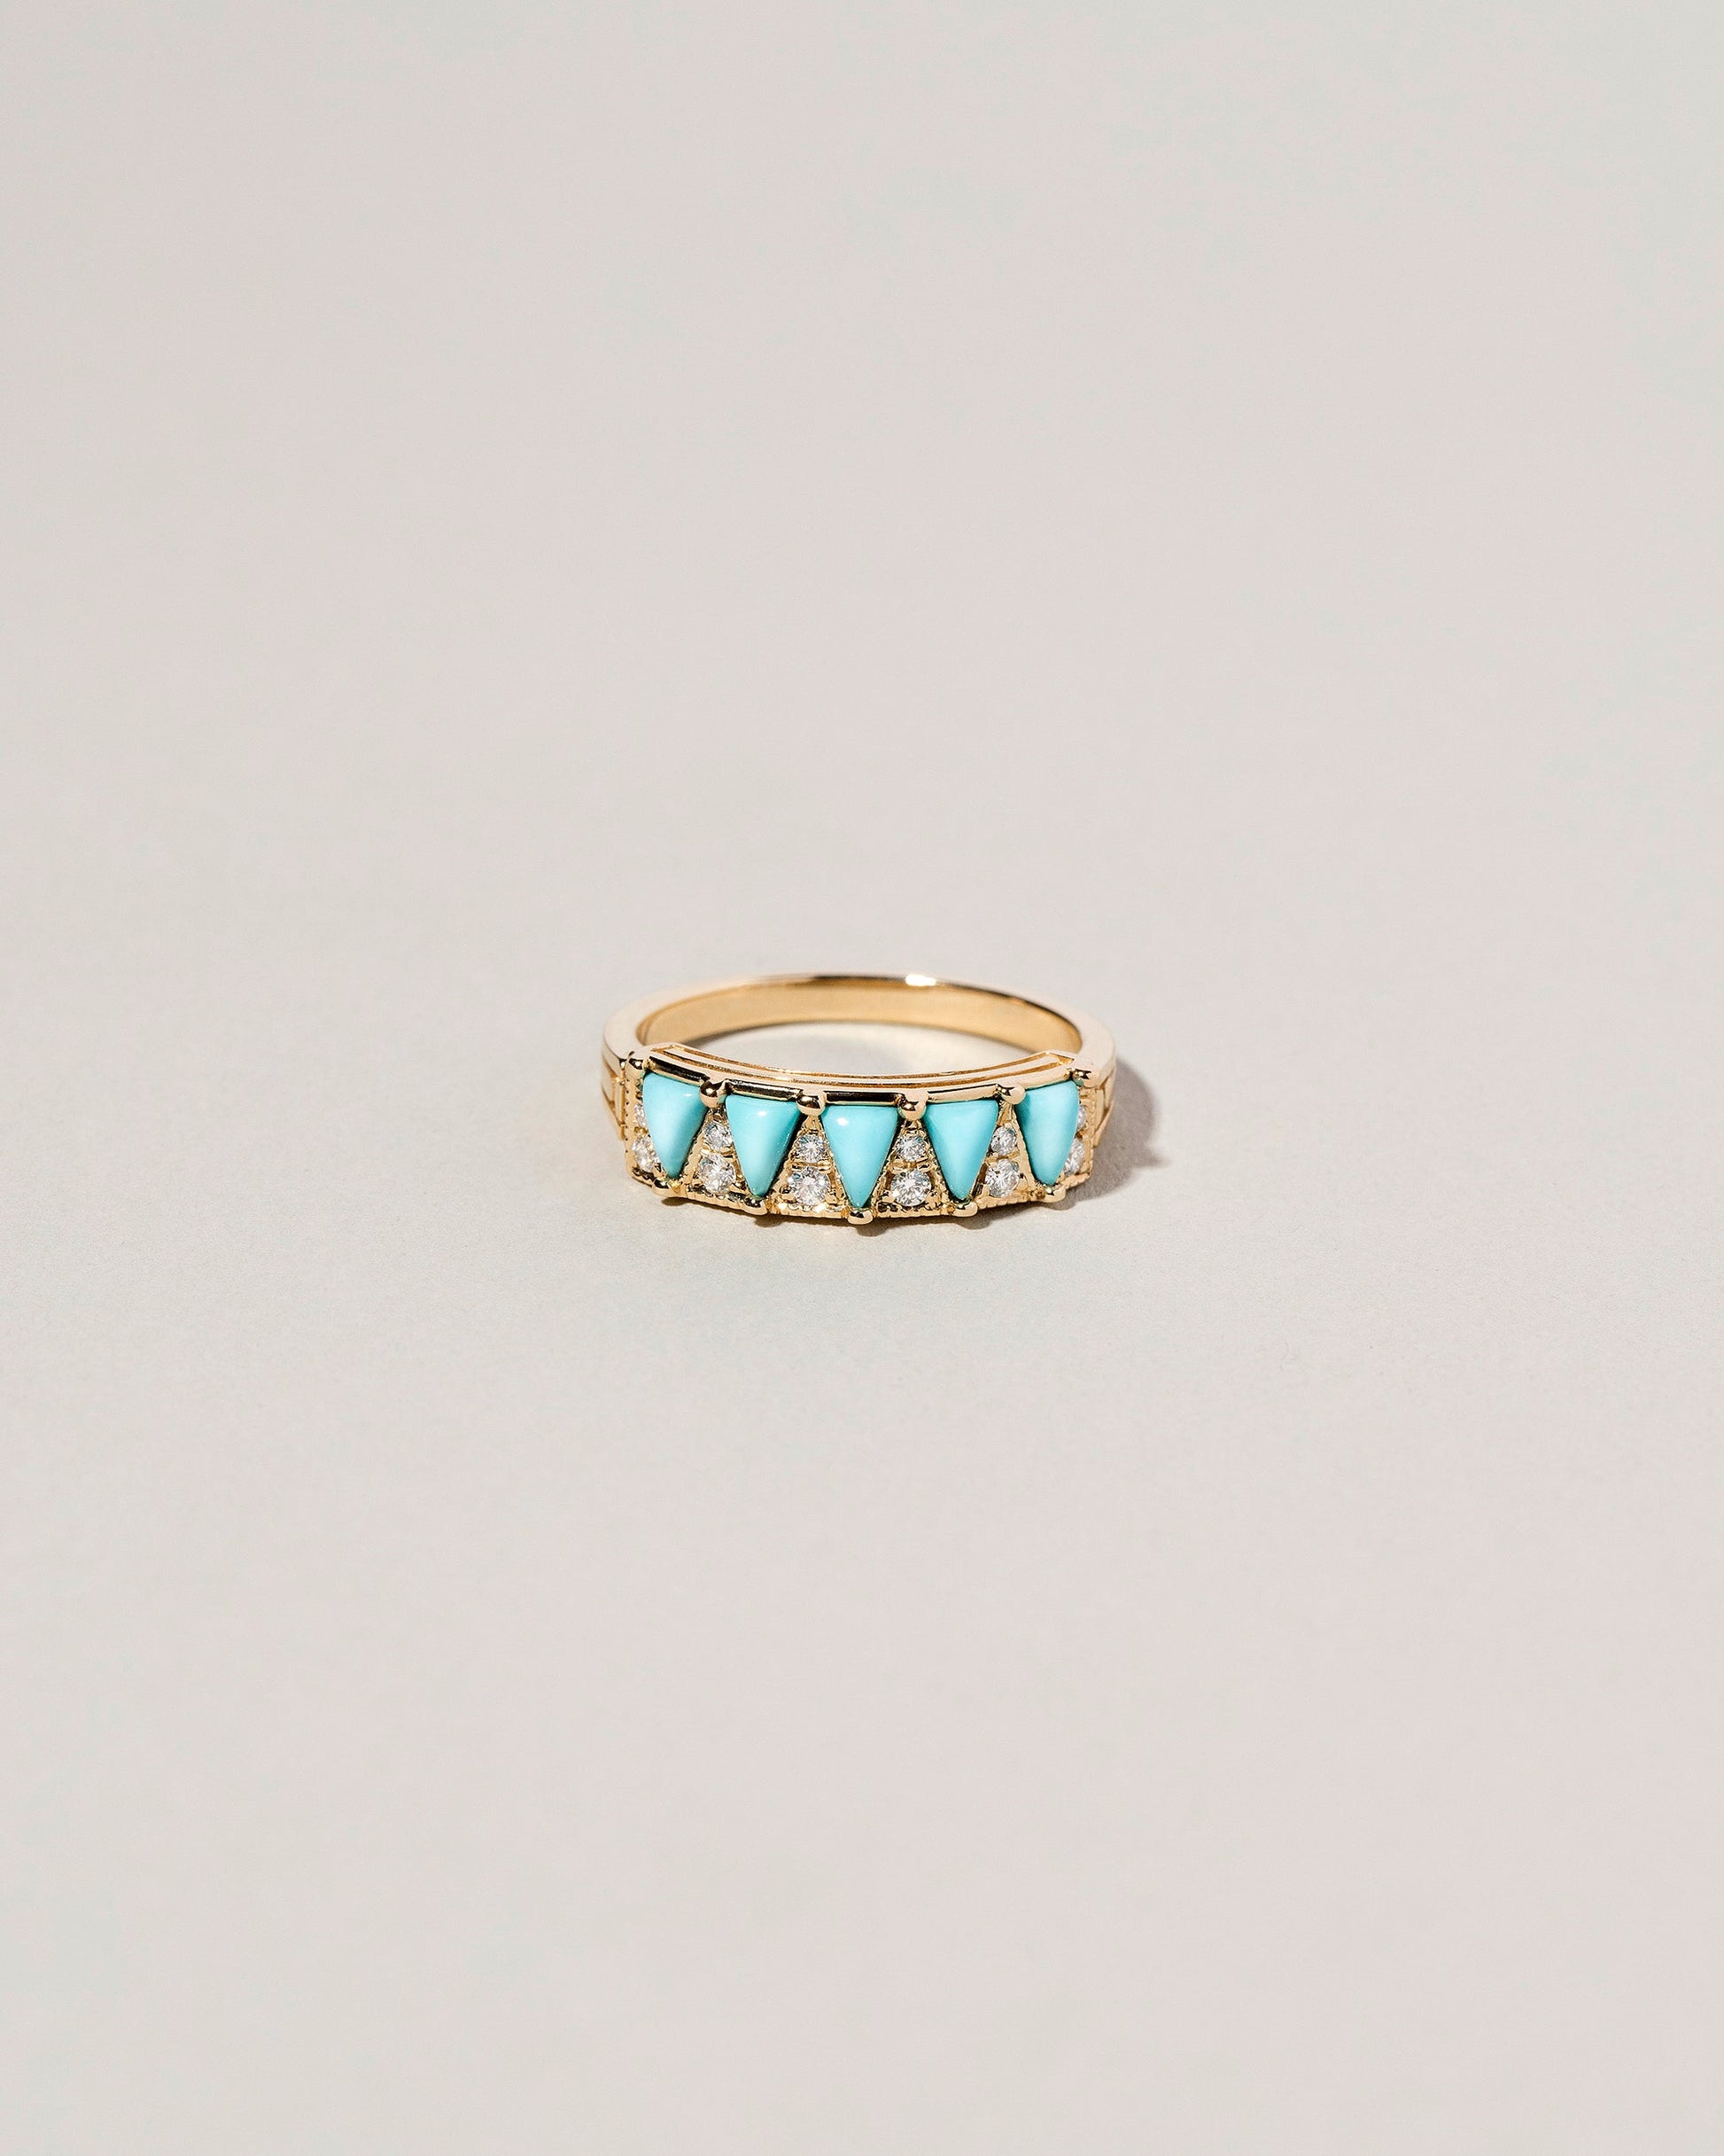  Five Triangle Ring - Turquoise on light color background.